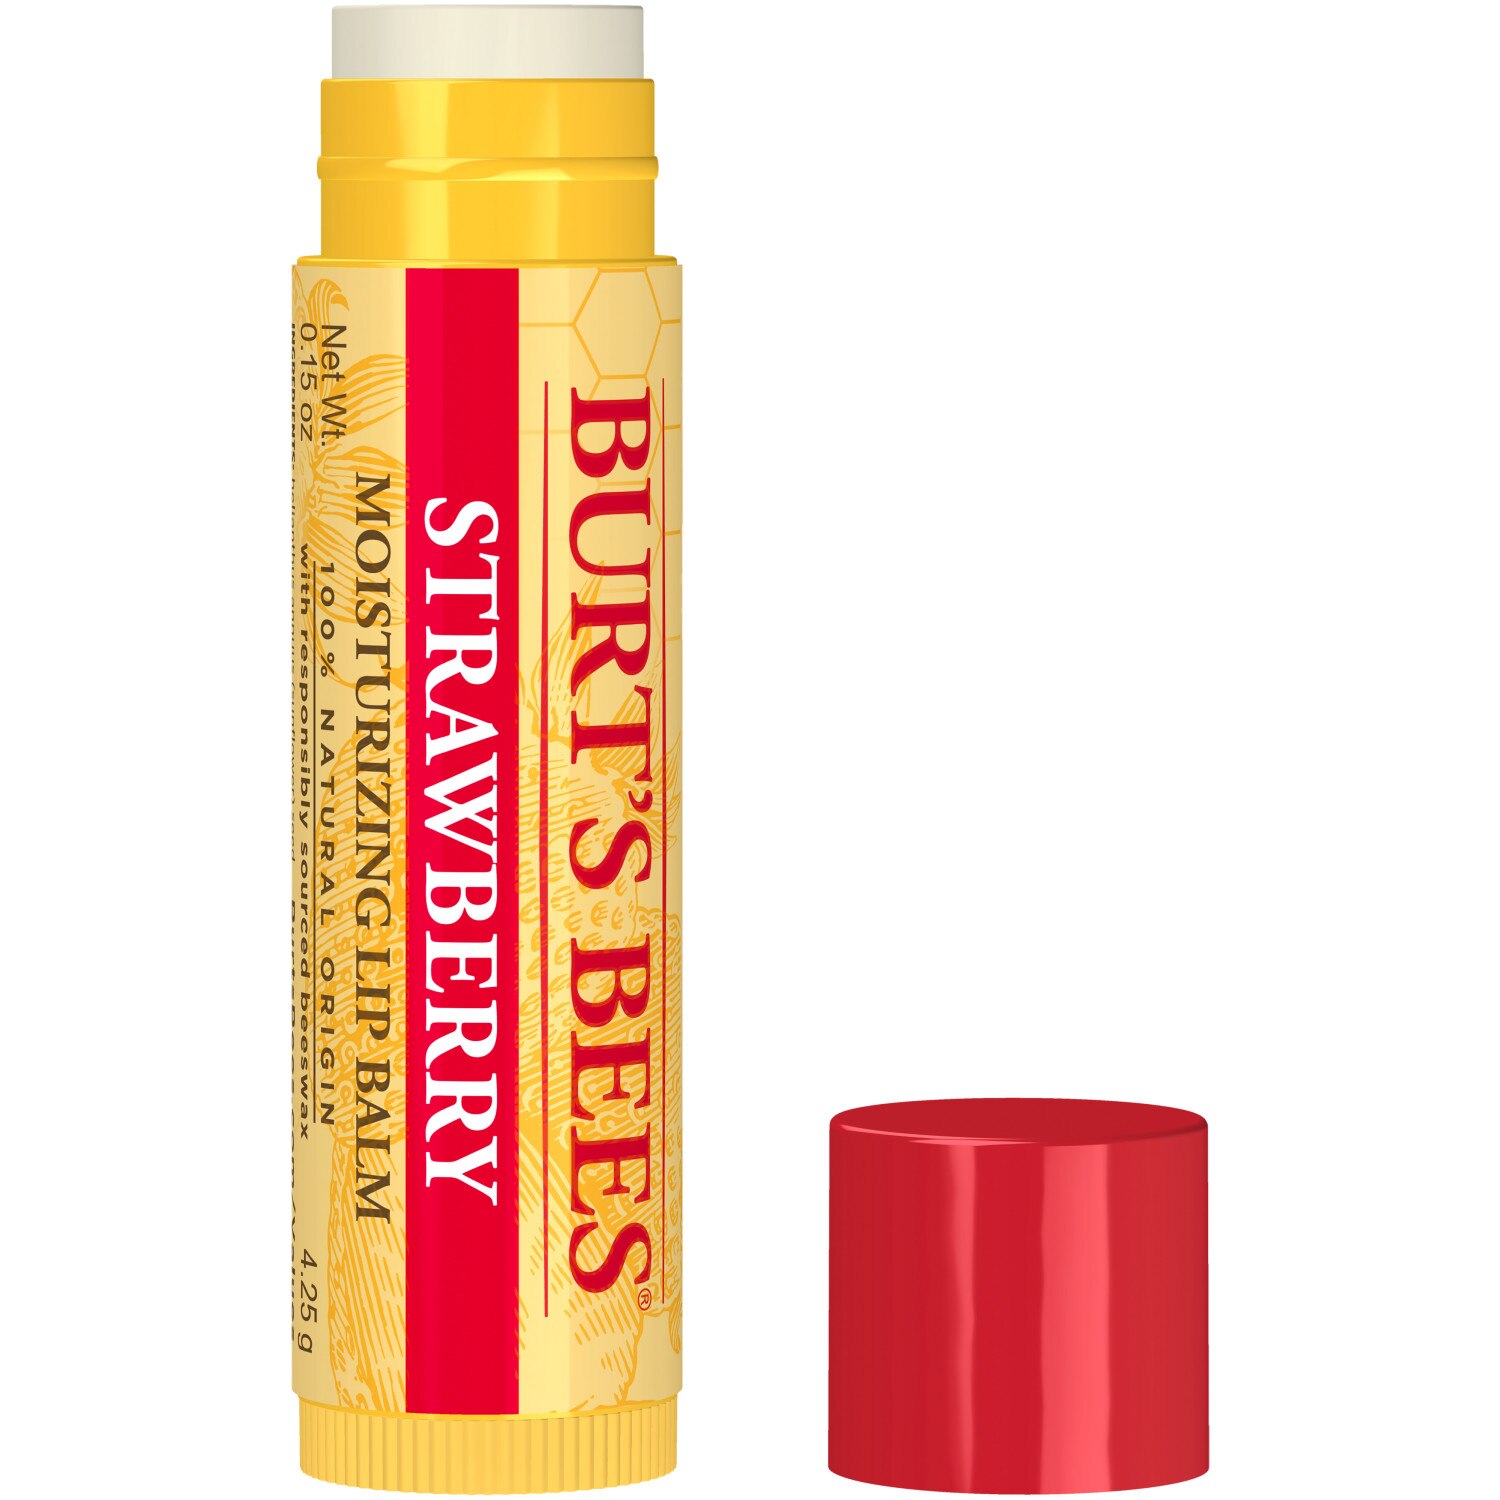 Burt's Bees 100% Natural Moisturizing Lip Balm, Strawberry with Beeswax & Fruit Extracts